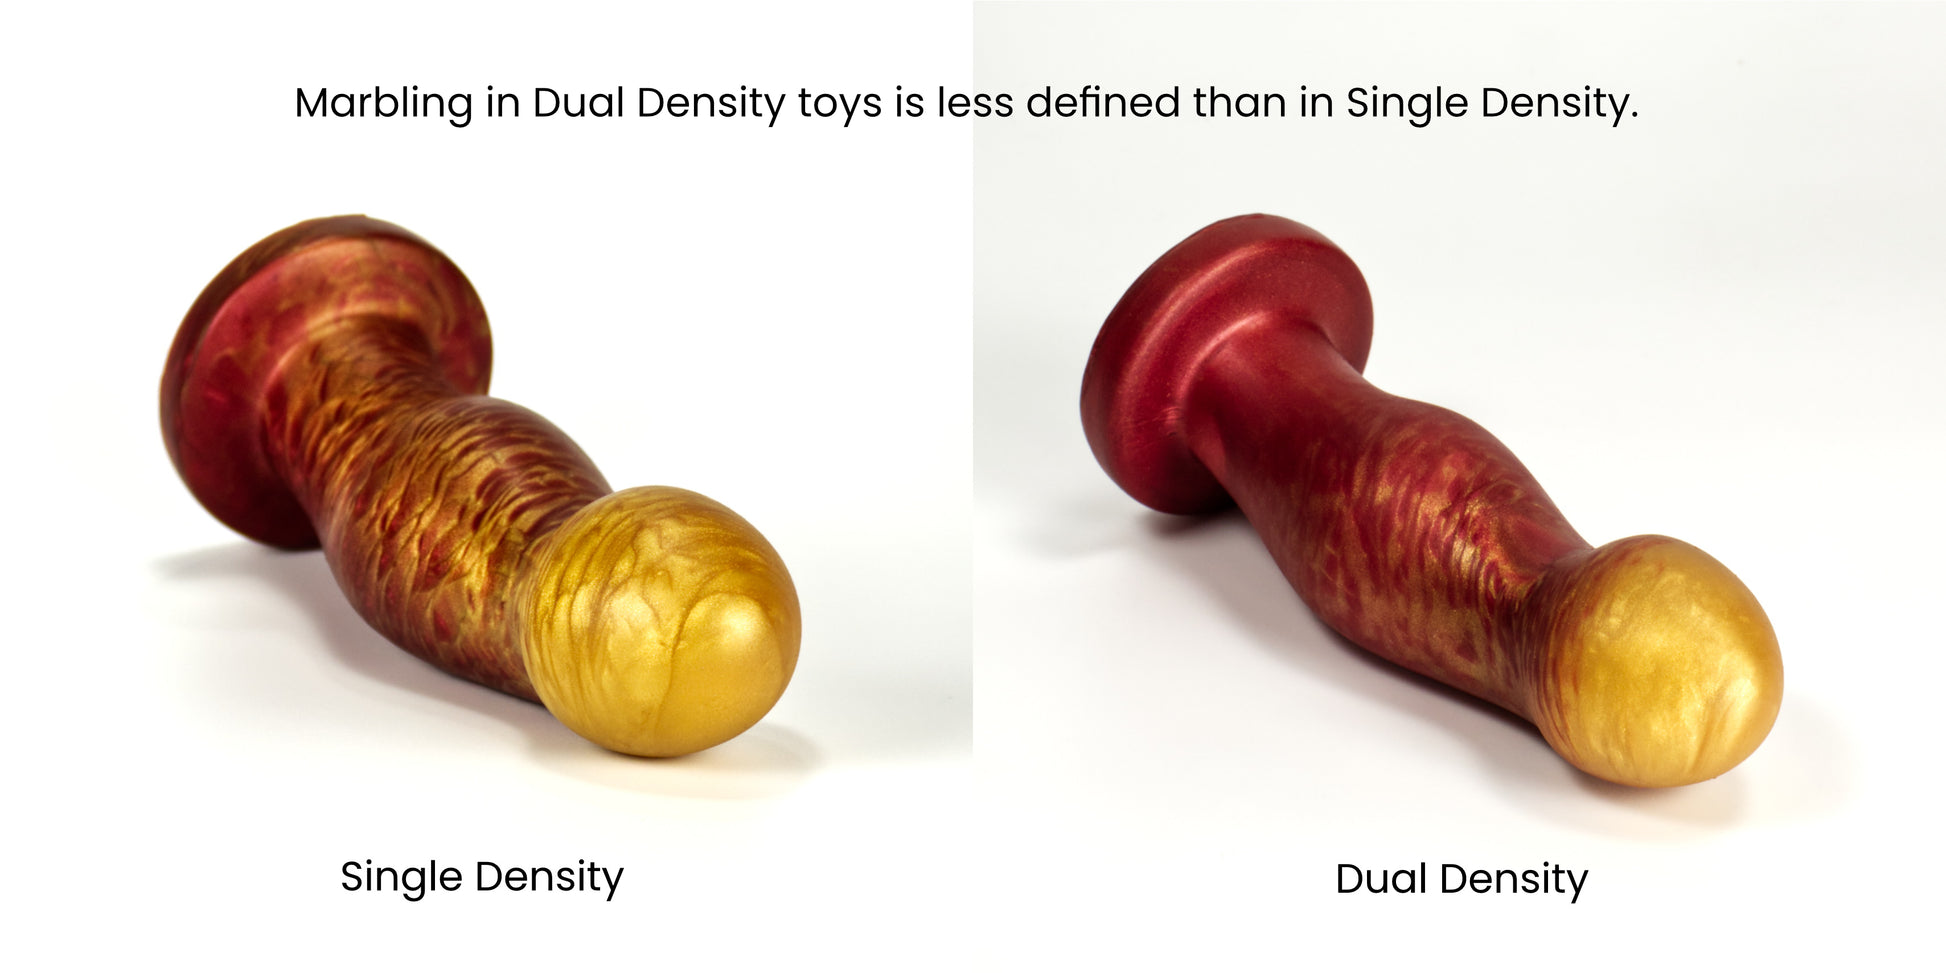 Two Ally dildos side by side. The left one has sharp, crisp marbled gold and red colors, and is labeled Single Density. The right has soft, feathery marbled gold and red colors and is labeled Dual Density. It is captioned: Marbling in Dual Density toys is less defined than in Single Density. 